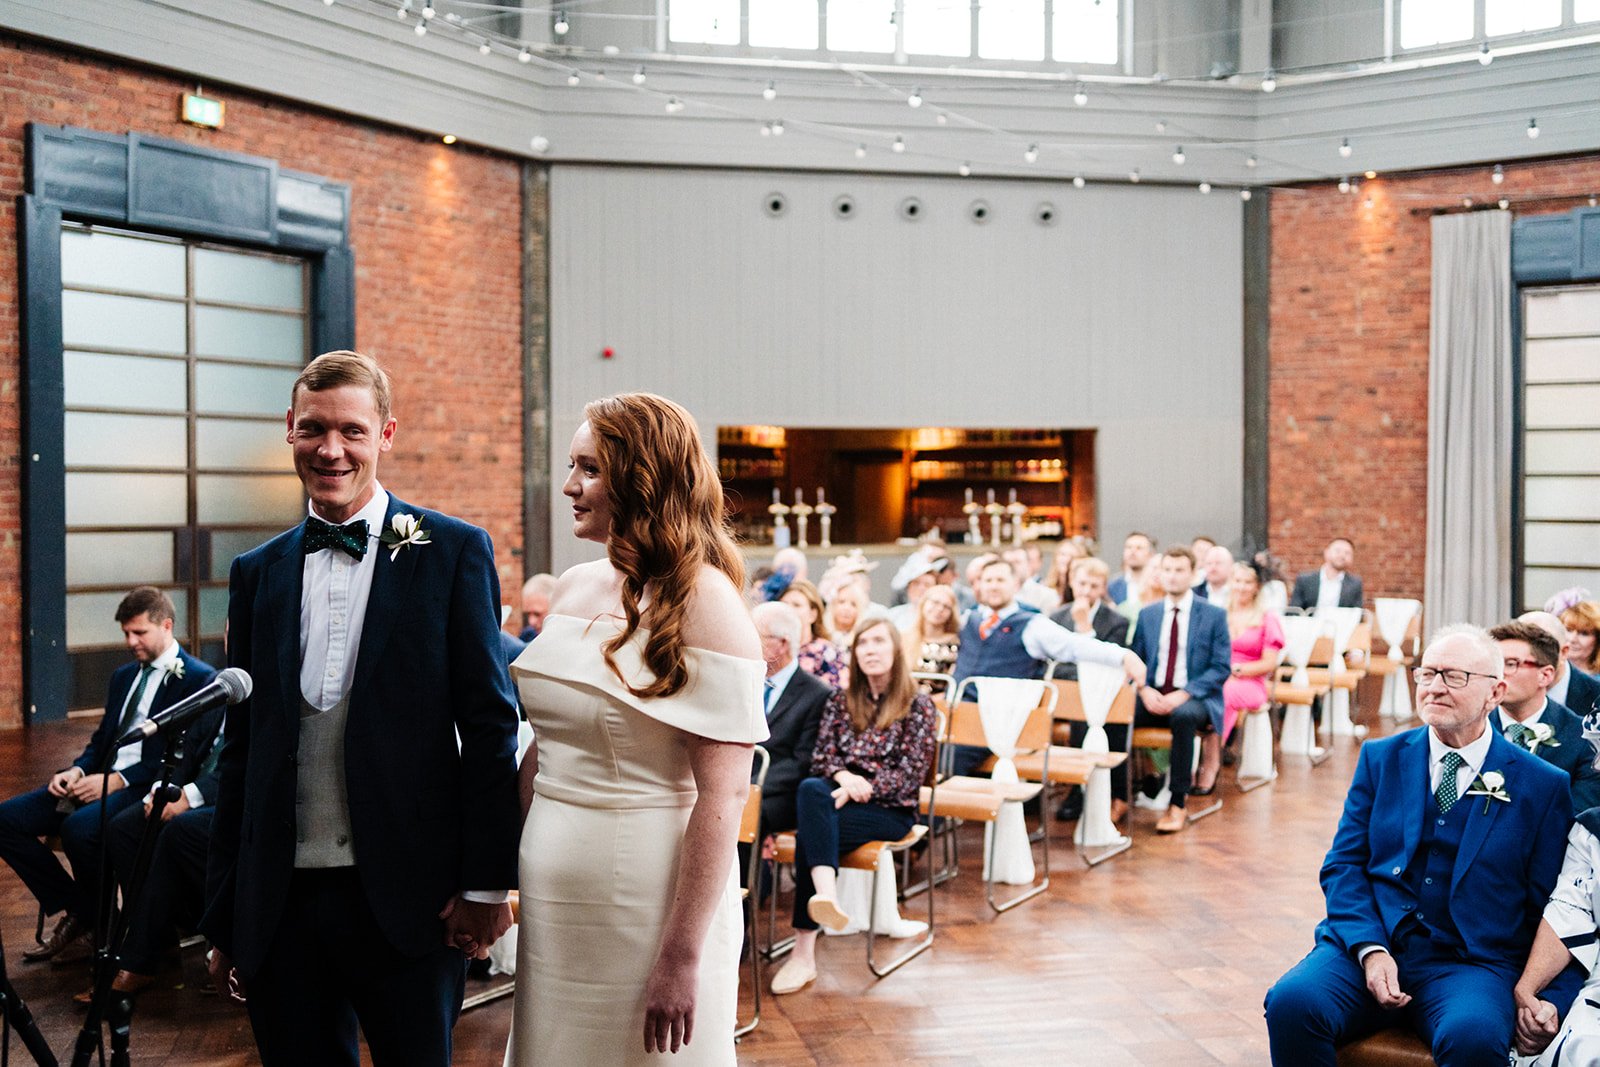 The bride and groom smile and hold hands during their wedding ceremony at Wylam Brewery in Newcastle